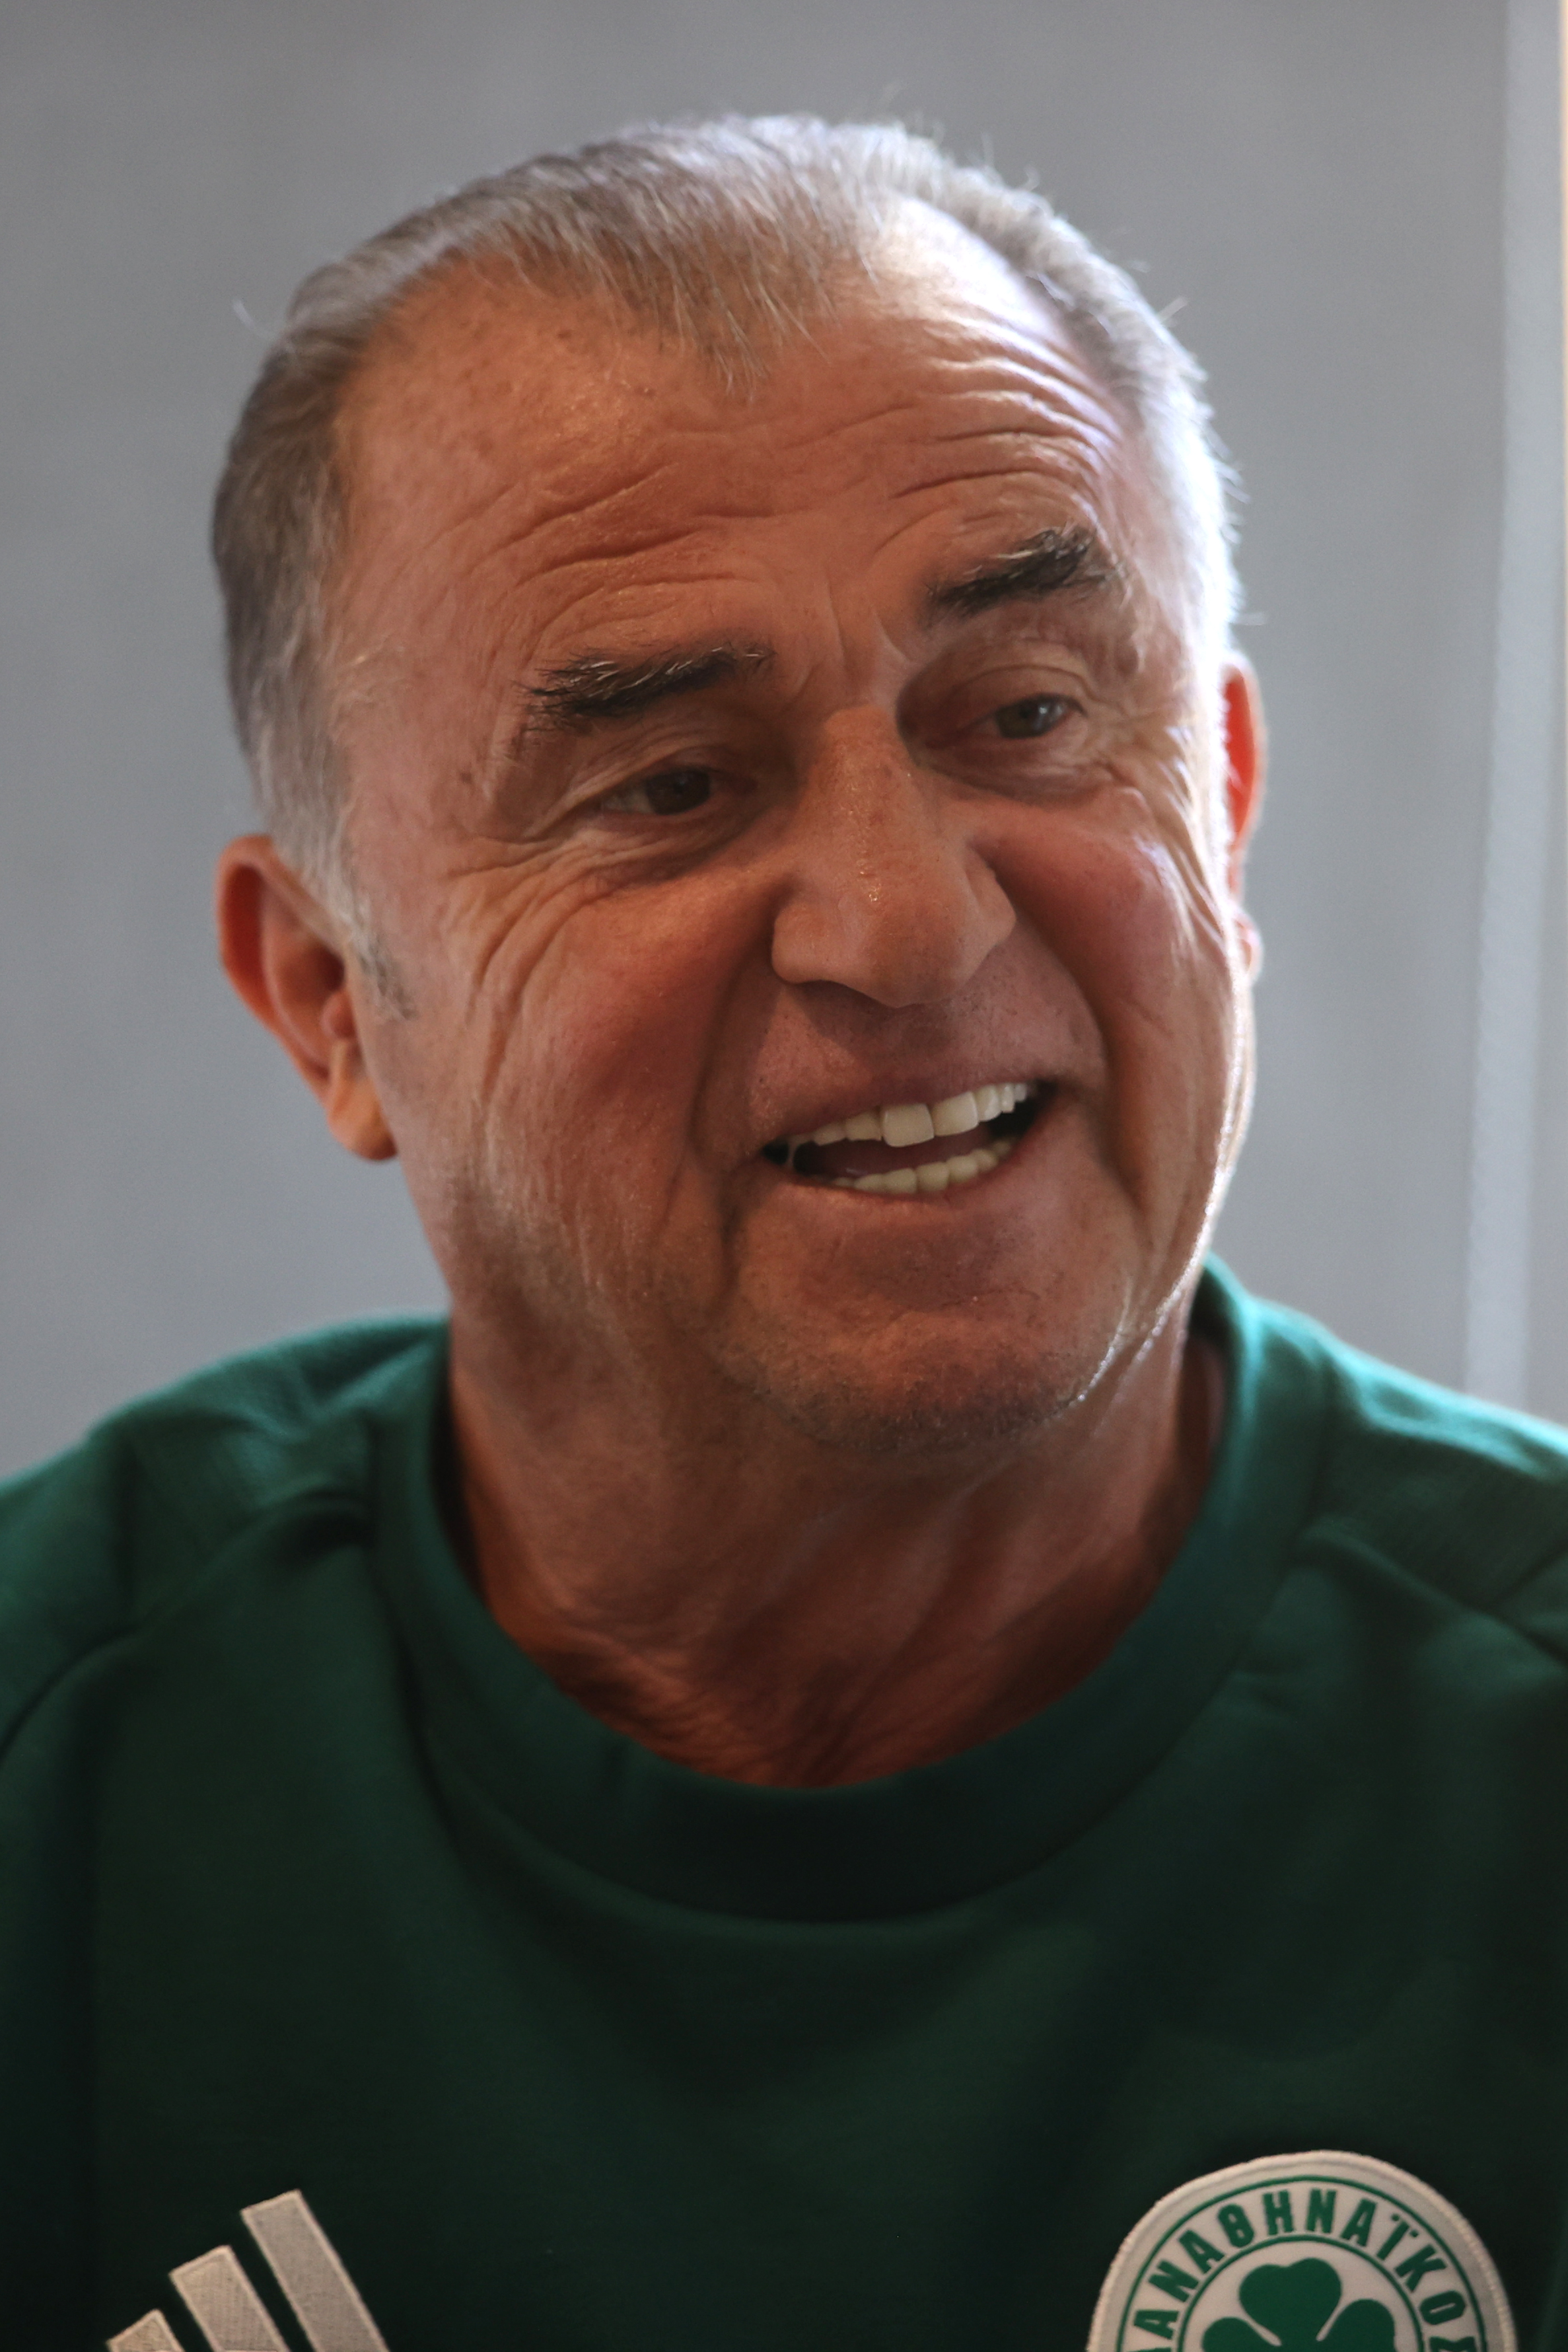 aa-20240411-34246532-34246529-head-coach-of-panathinaikos-fatih-terim-meets-with-journalists-in-athens.jpg